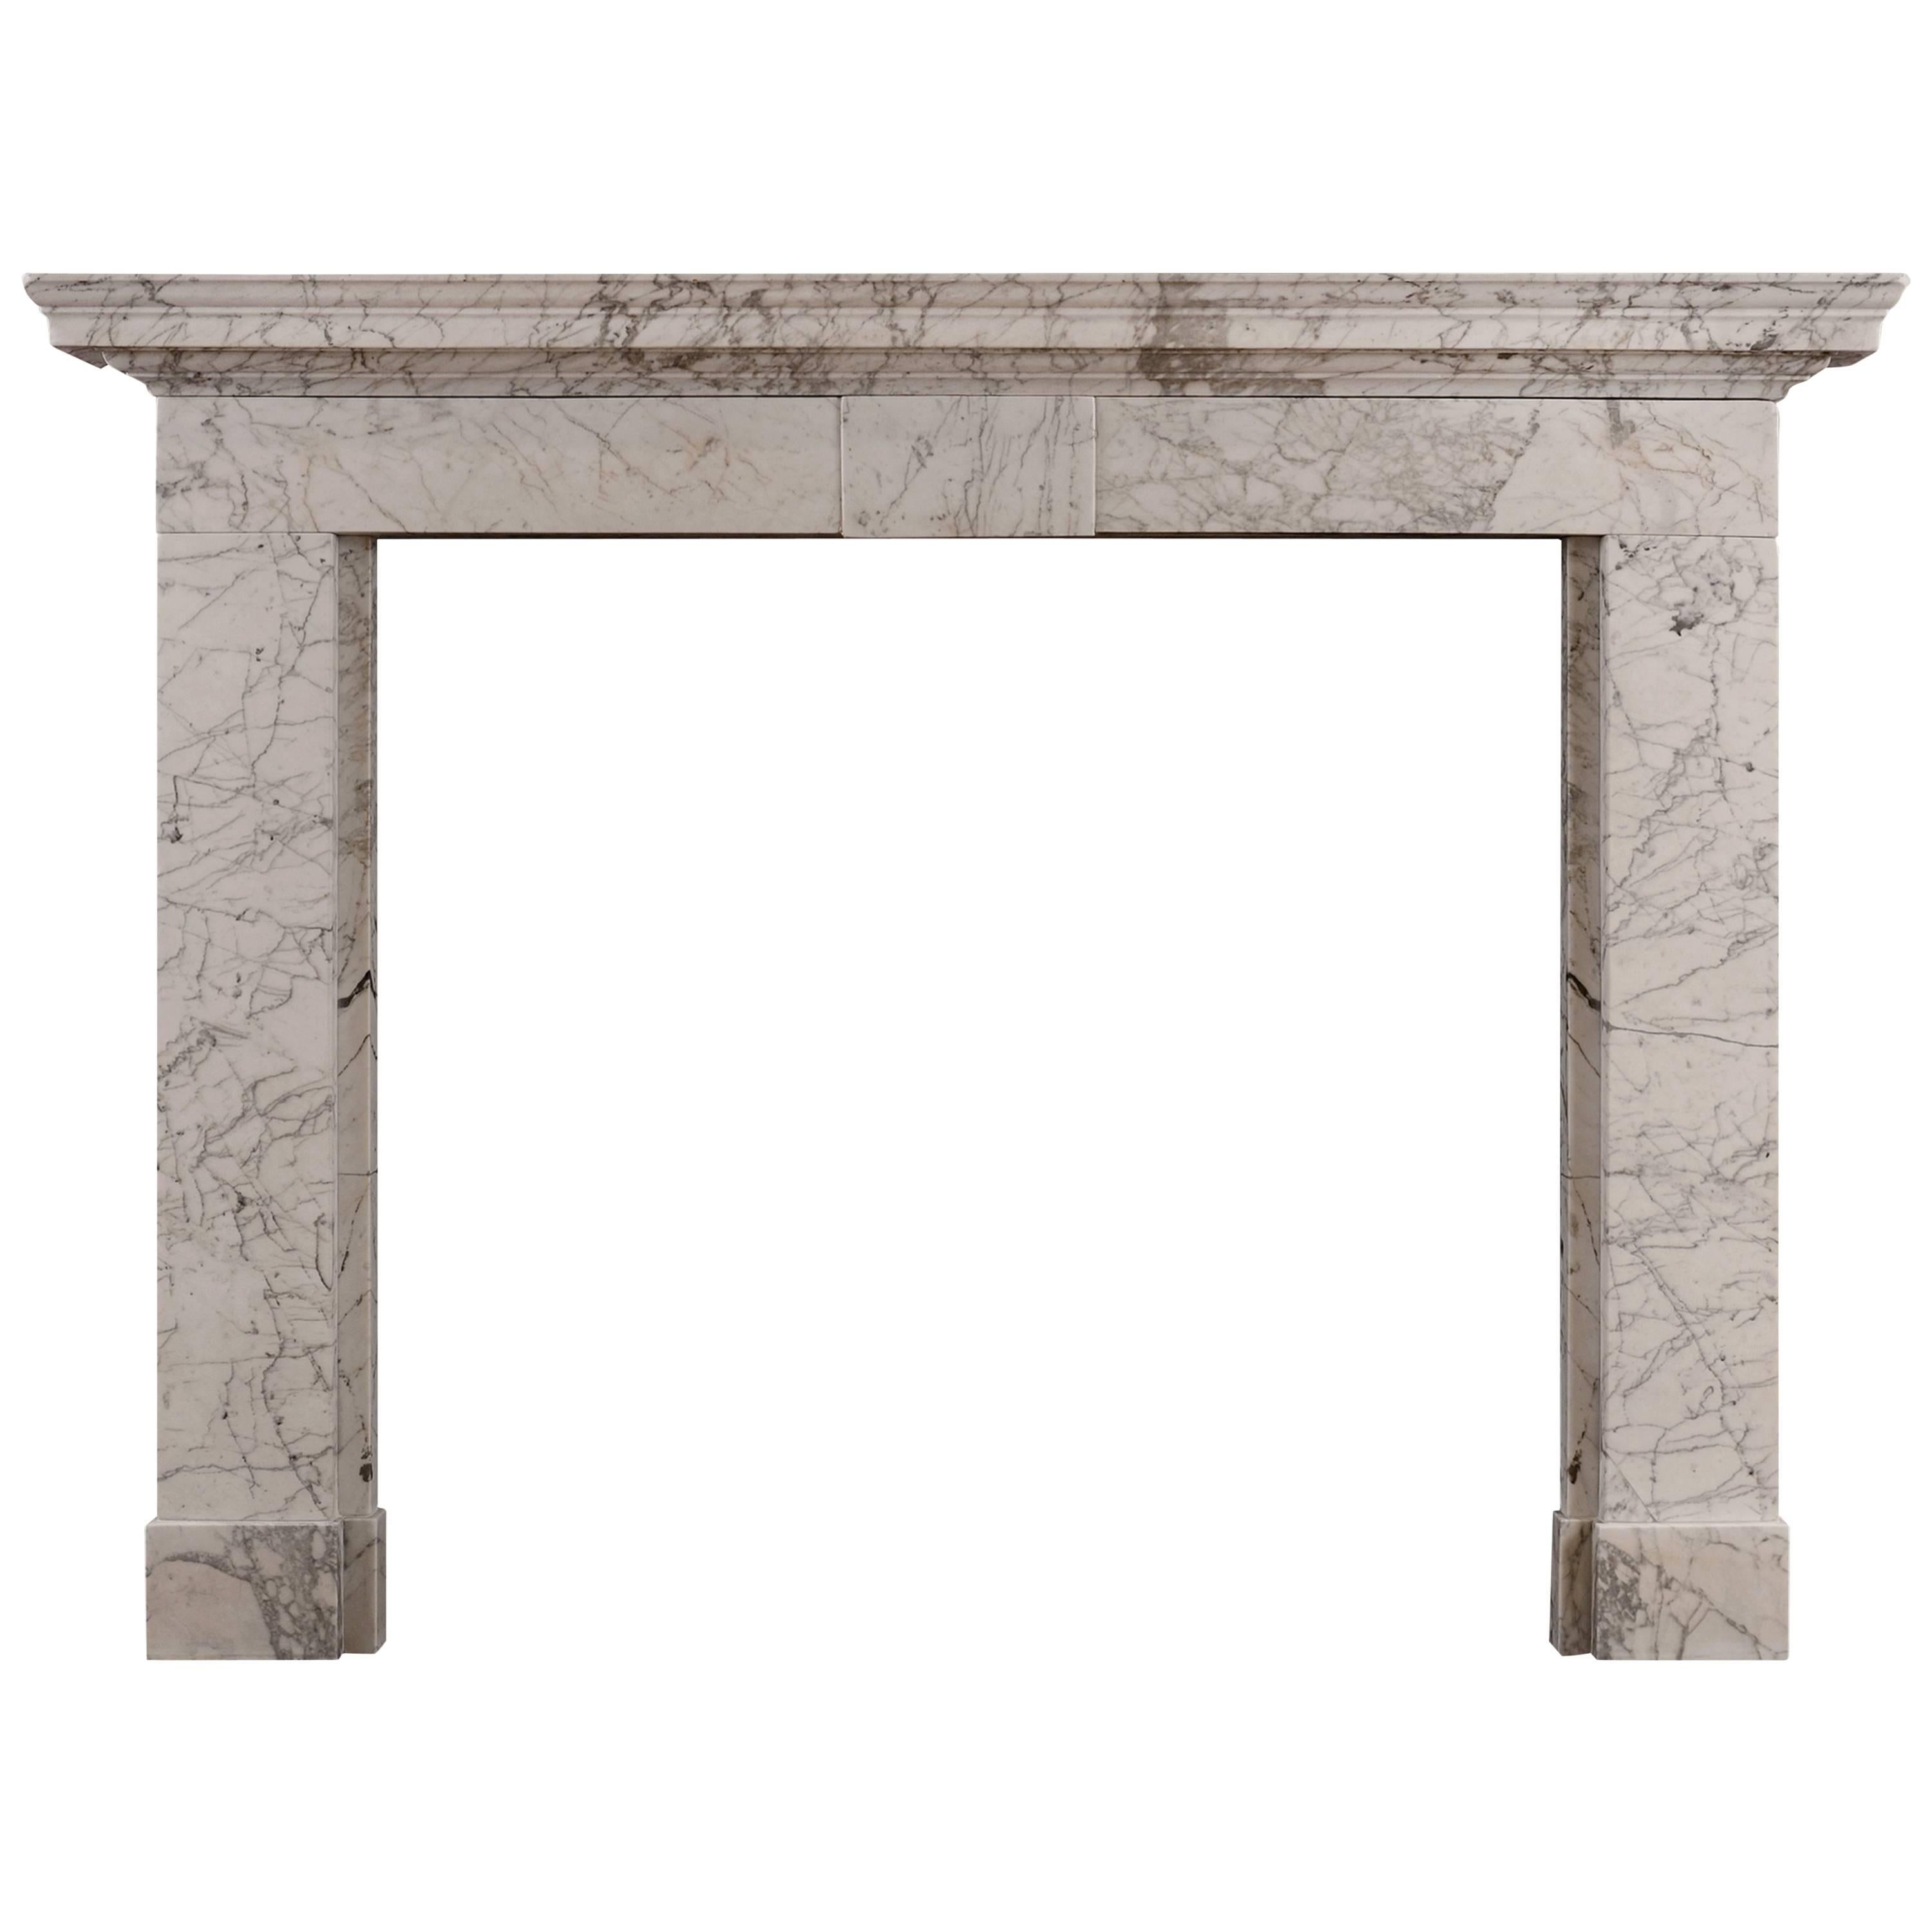 Early Georgian Fireplace in Heavily Veined Statuary Marble For Sale